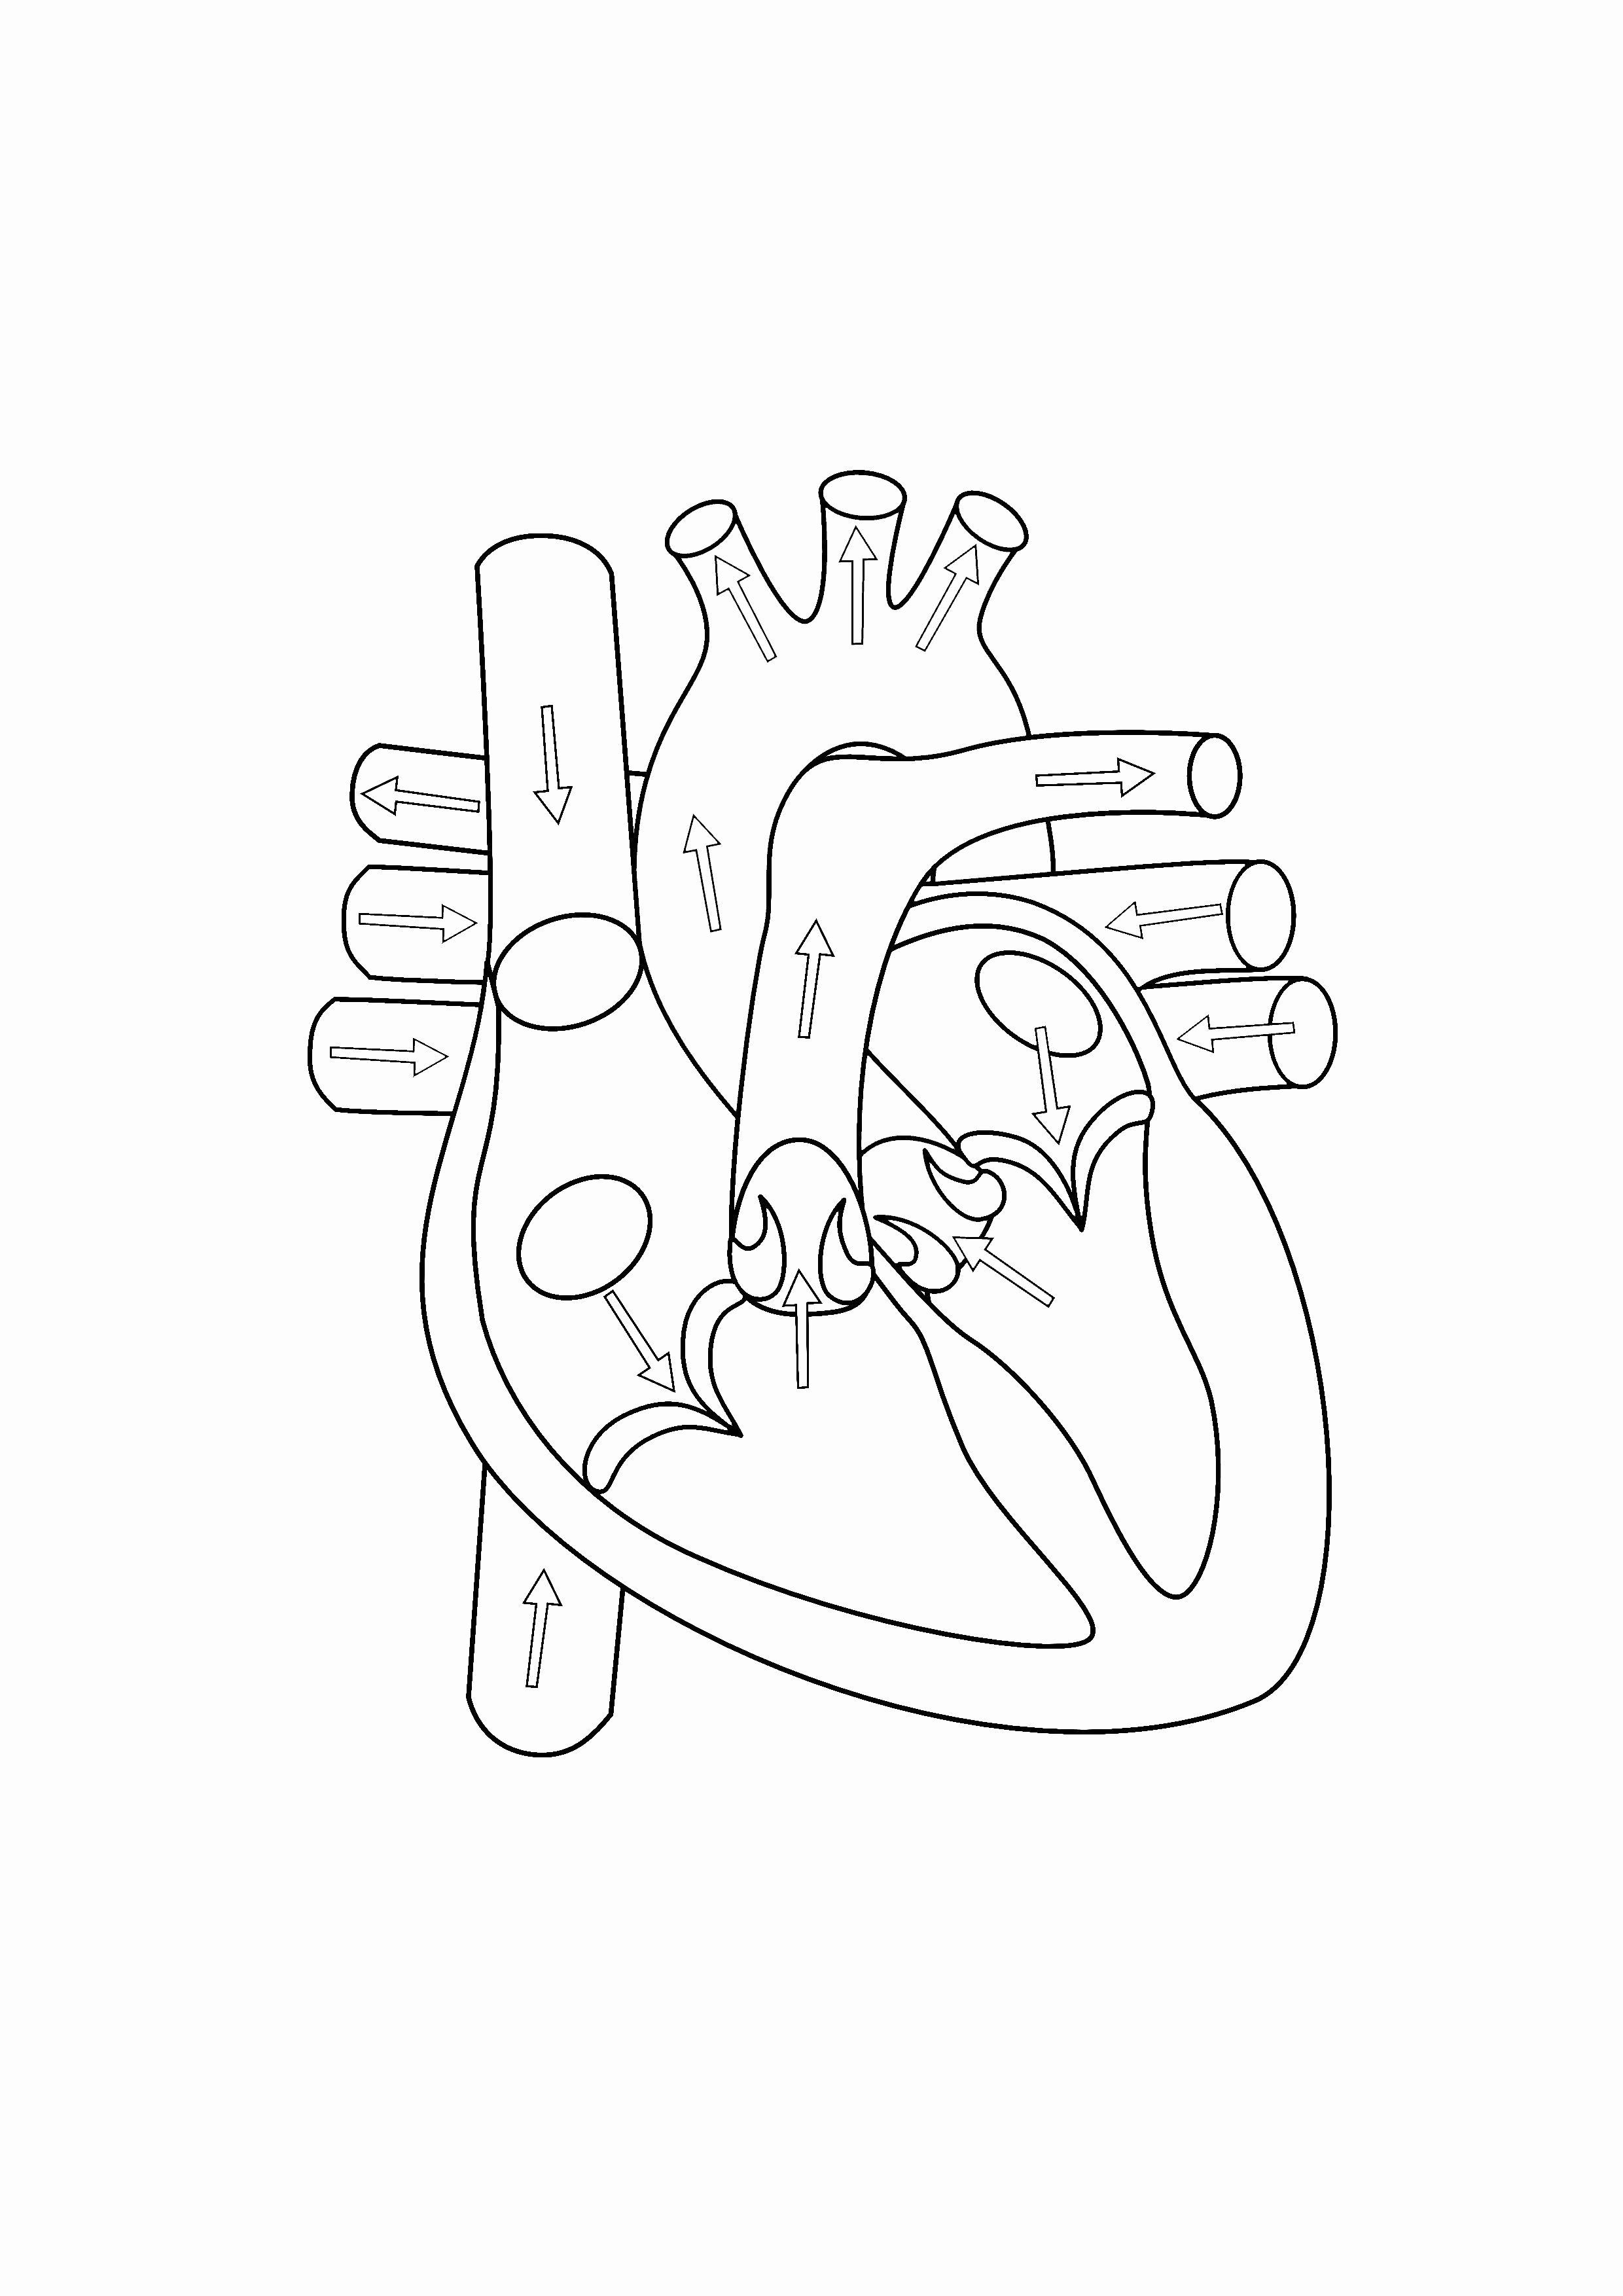 Anatomical Heart Coloring Pages pdf - Free Anatomical Heart Coloring Pages